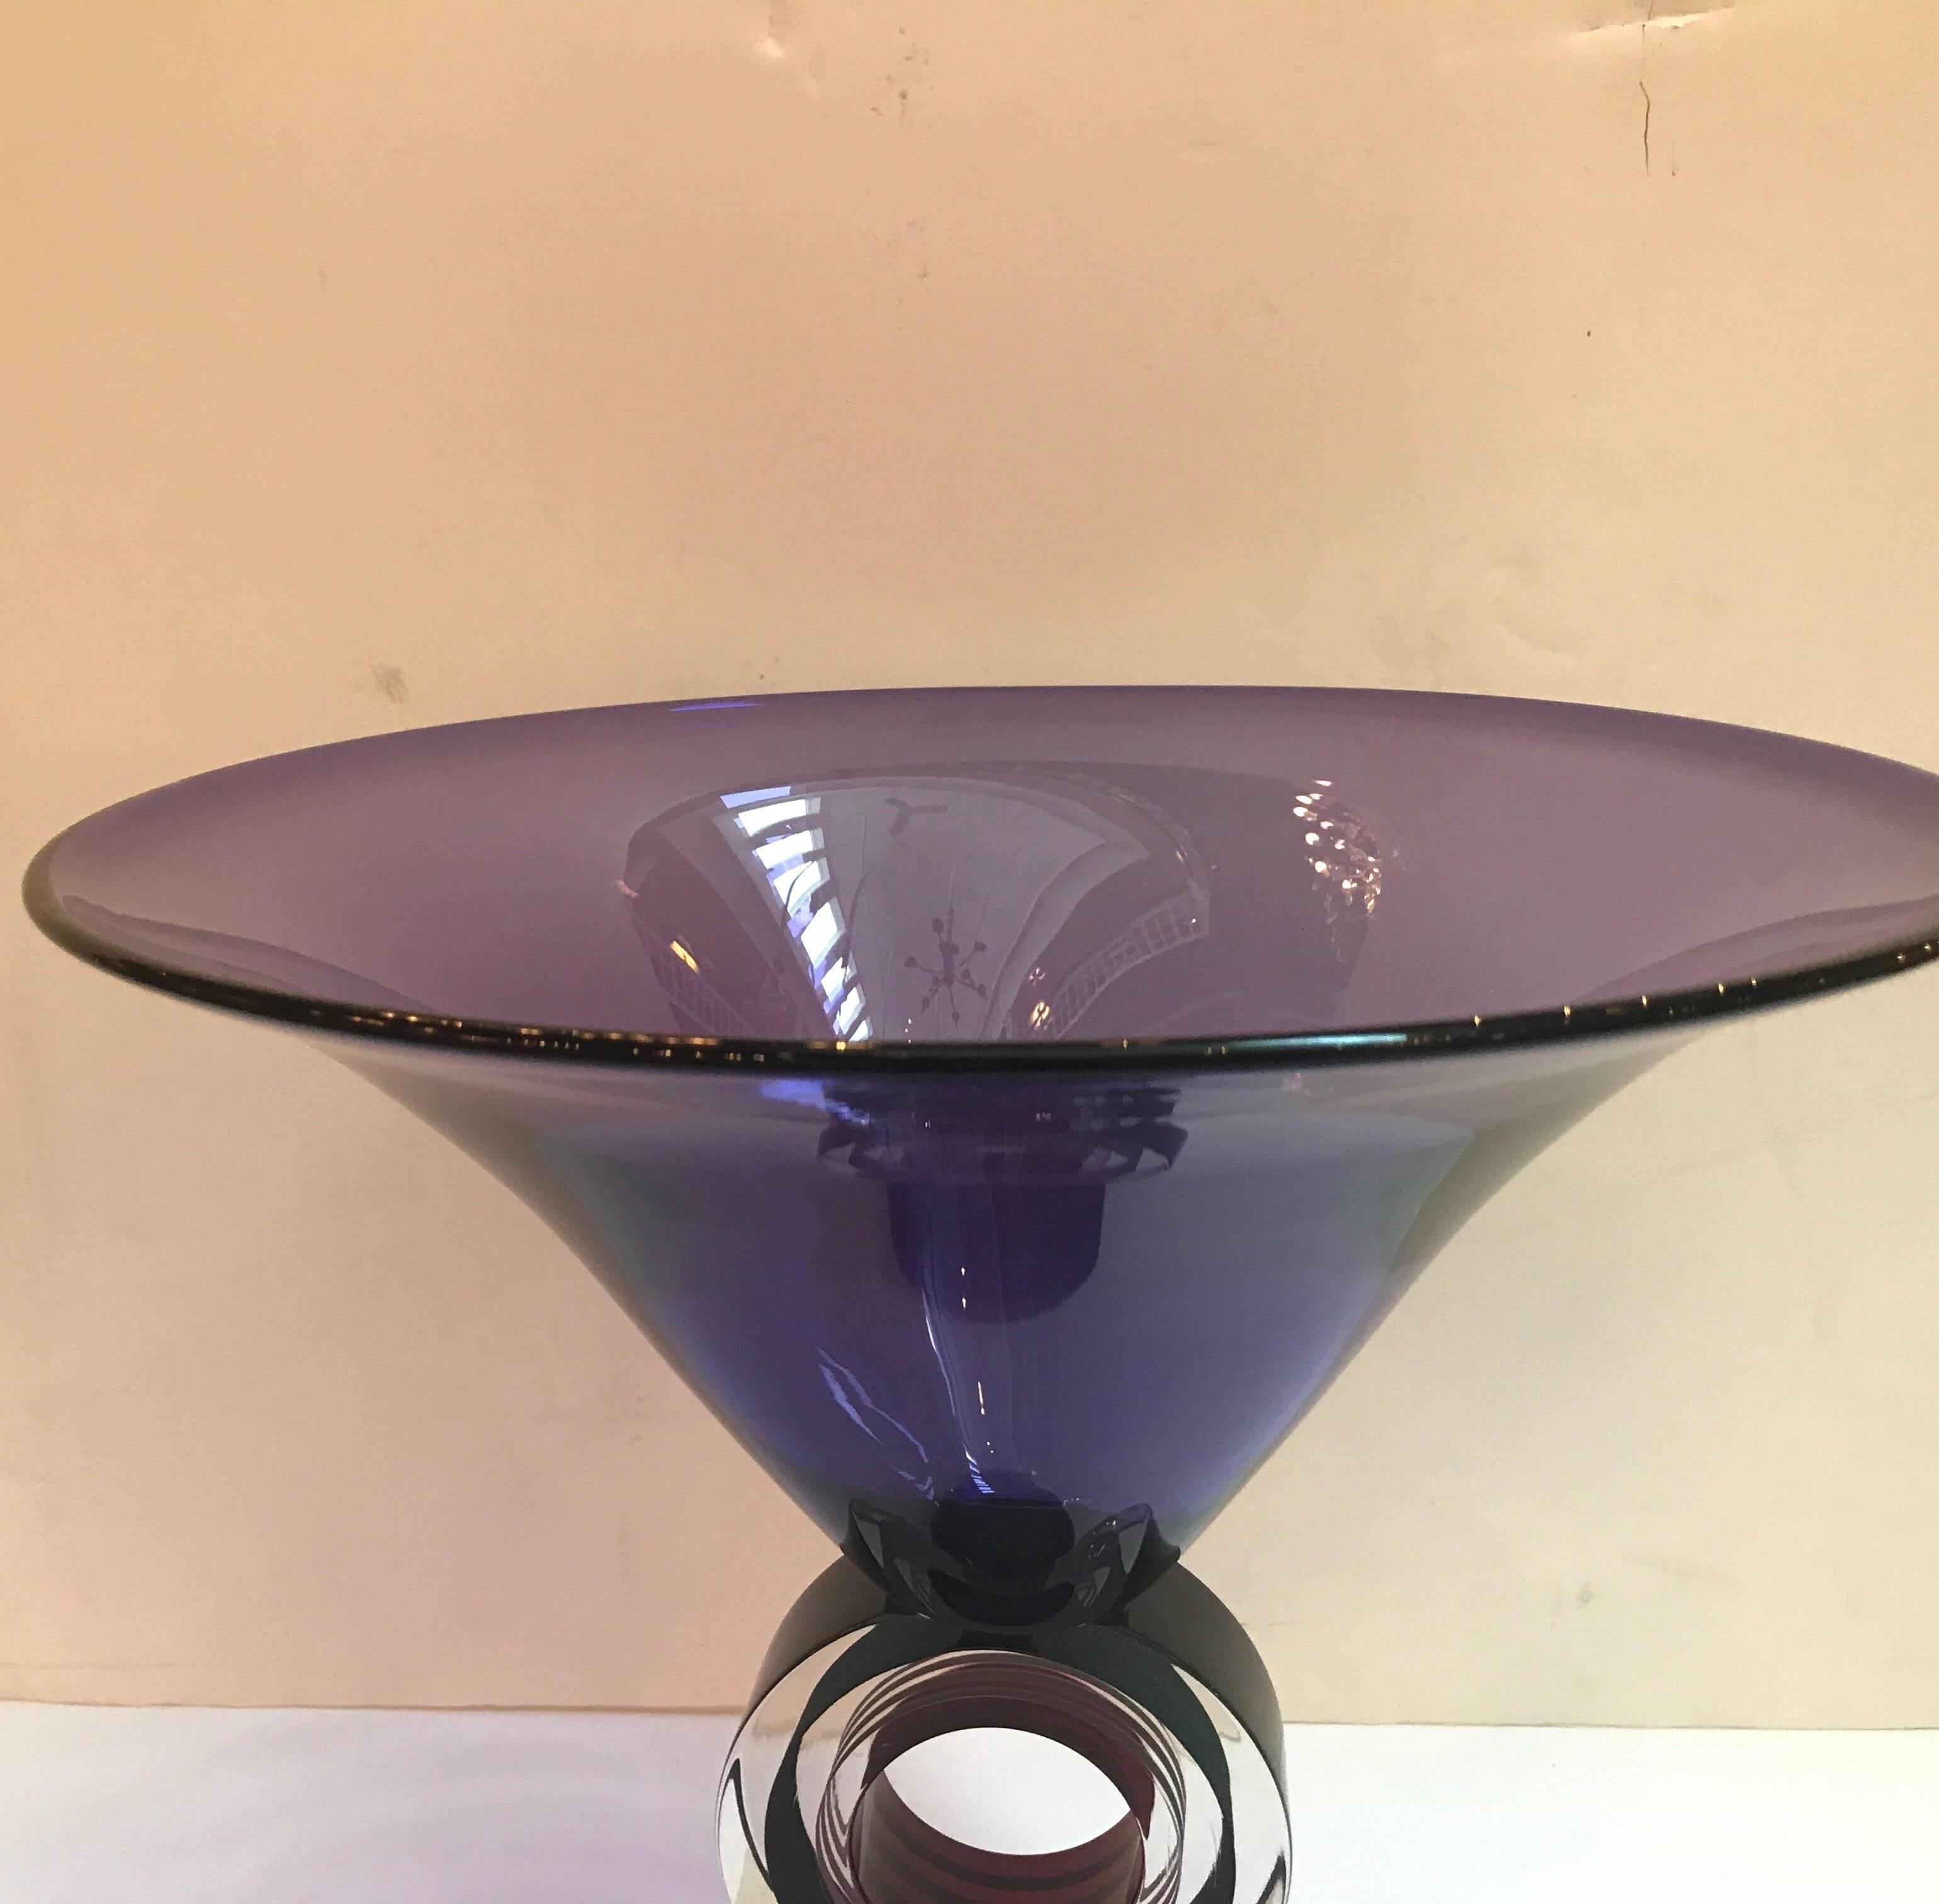 A tall modern trumpet form center bowl with unusual pedestal base. The base with a circular stem with bands of colored glass resting on a black solid glass cone base. The piece is signed and numbered limited edition of 500. The artist signature is